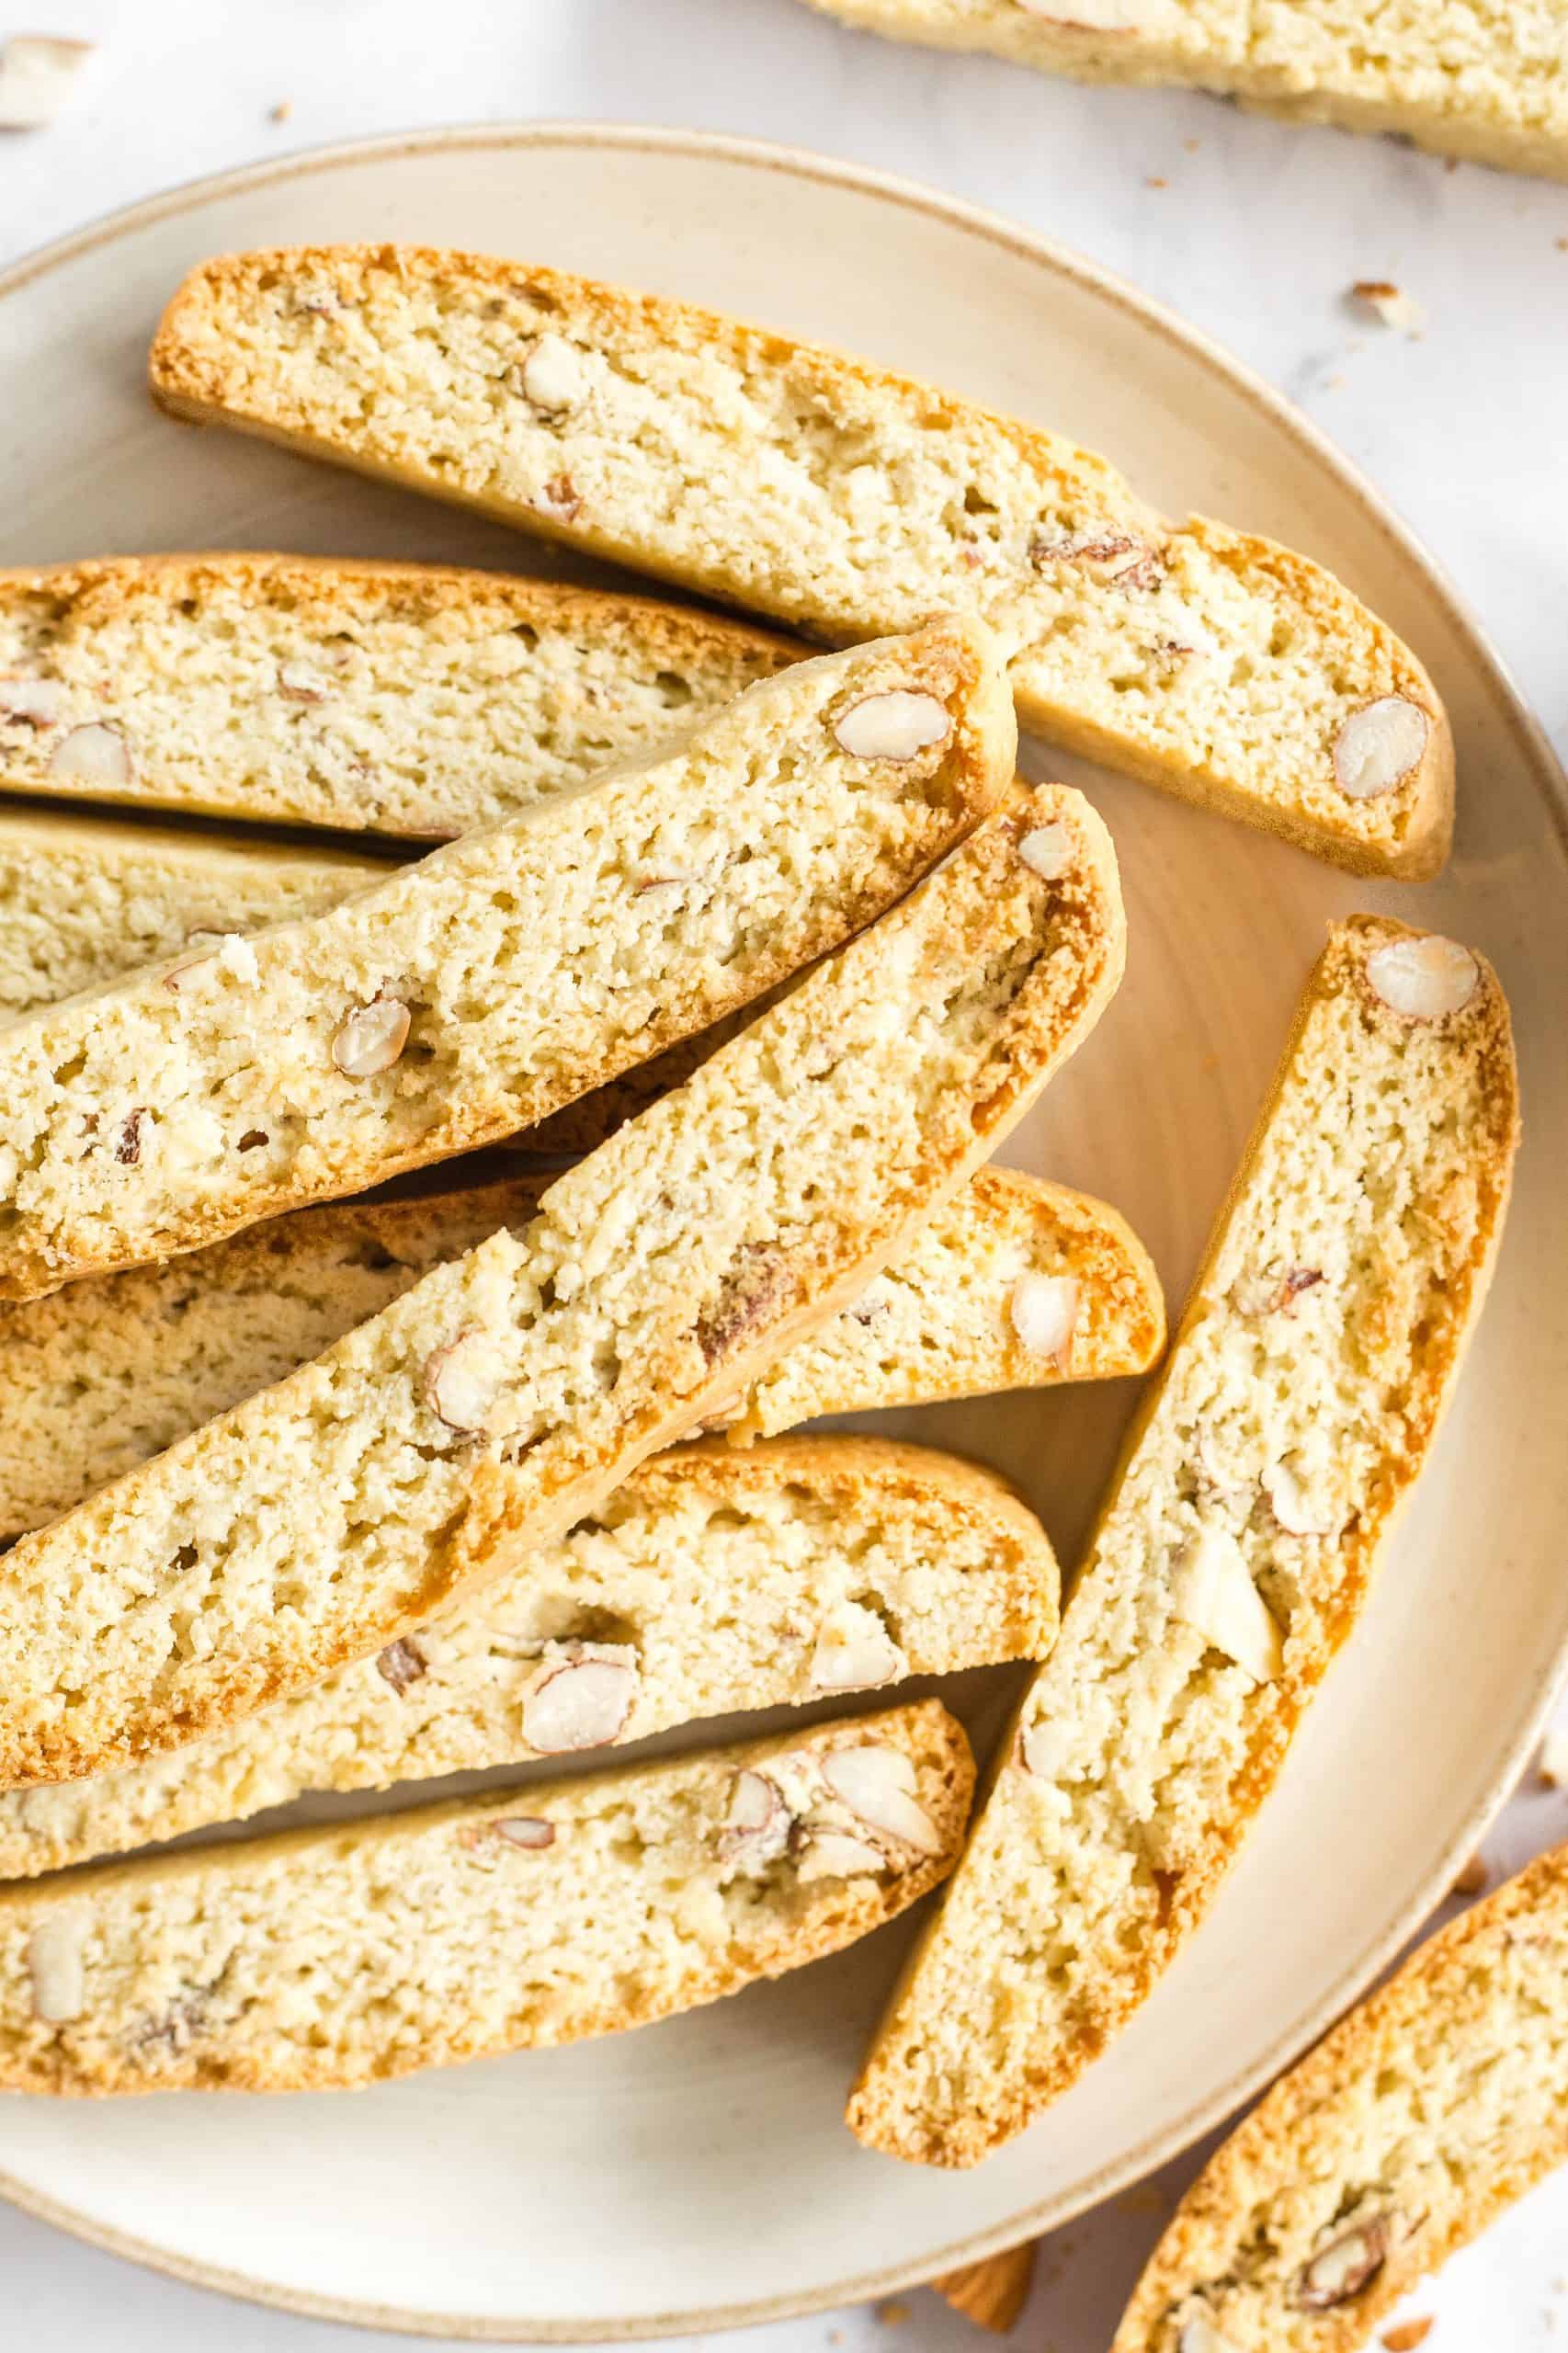 A plate full of biscotti